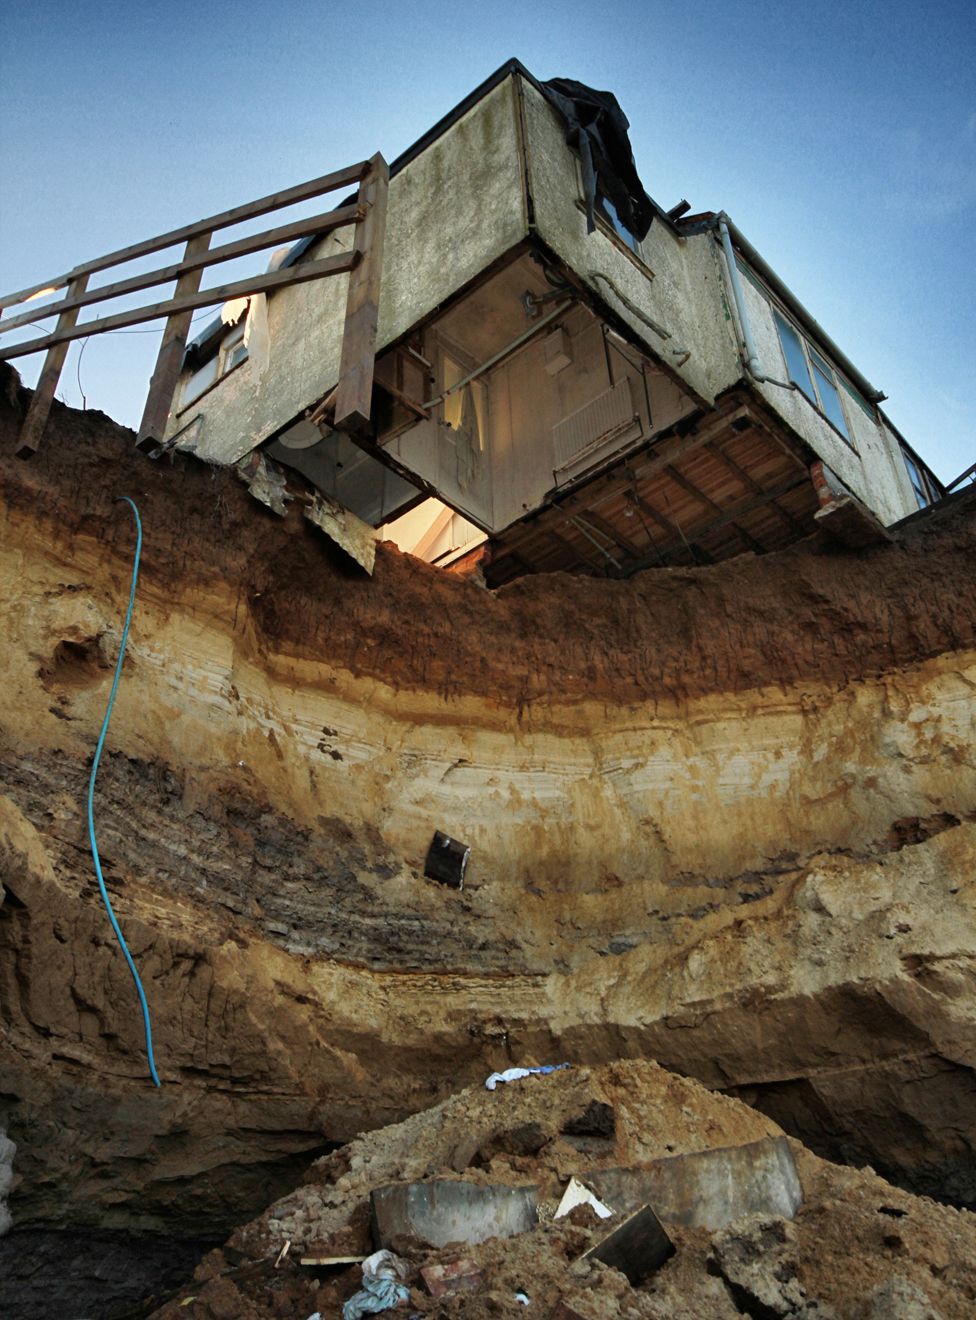 View looking upwards from the beach to the house overhanging the cliff edge